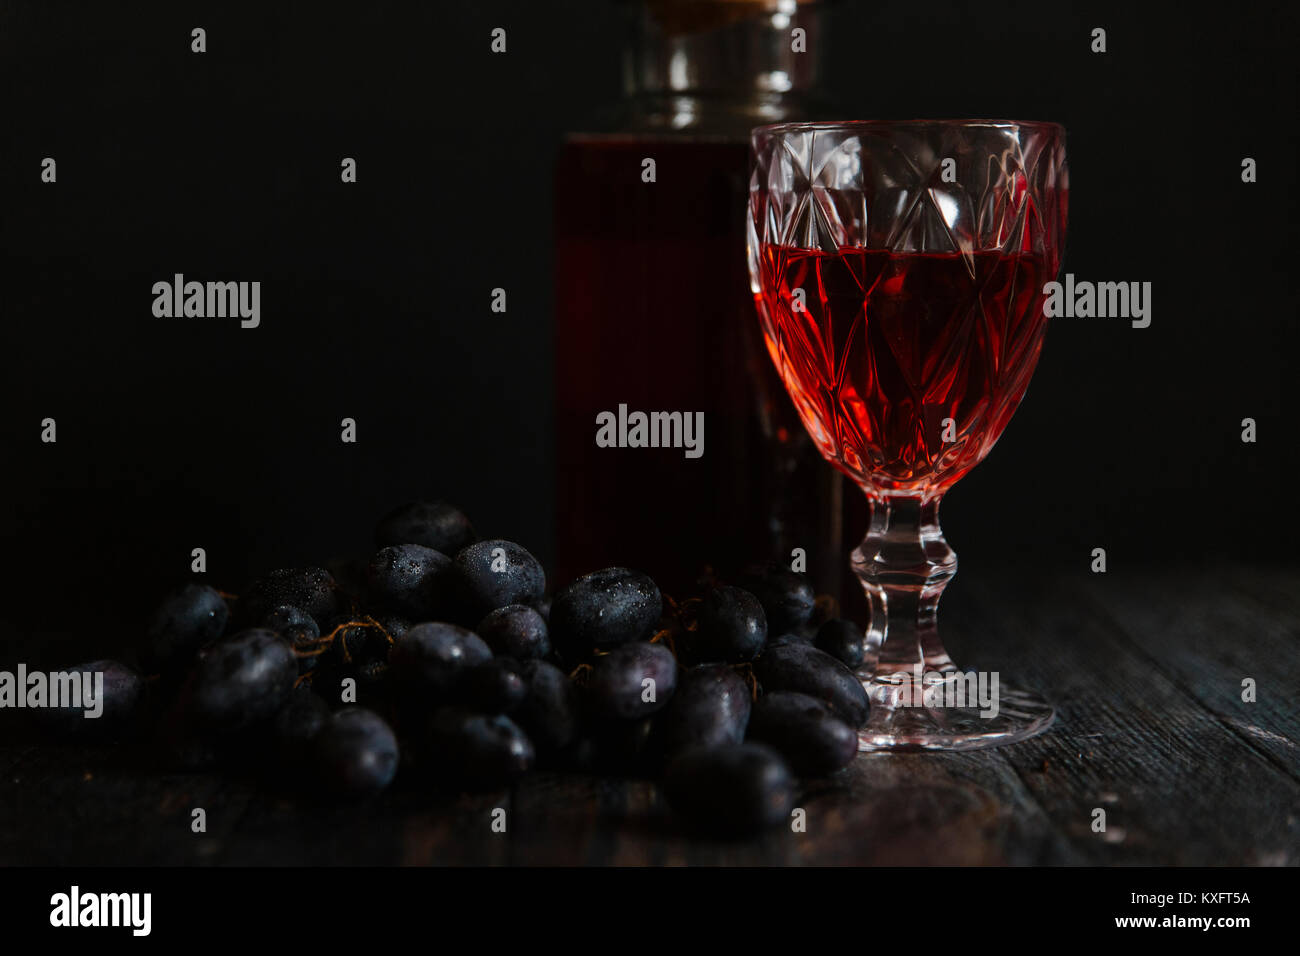 Red wine and grapes against black background Stock Photo